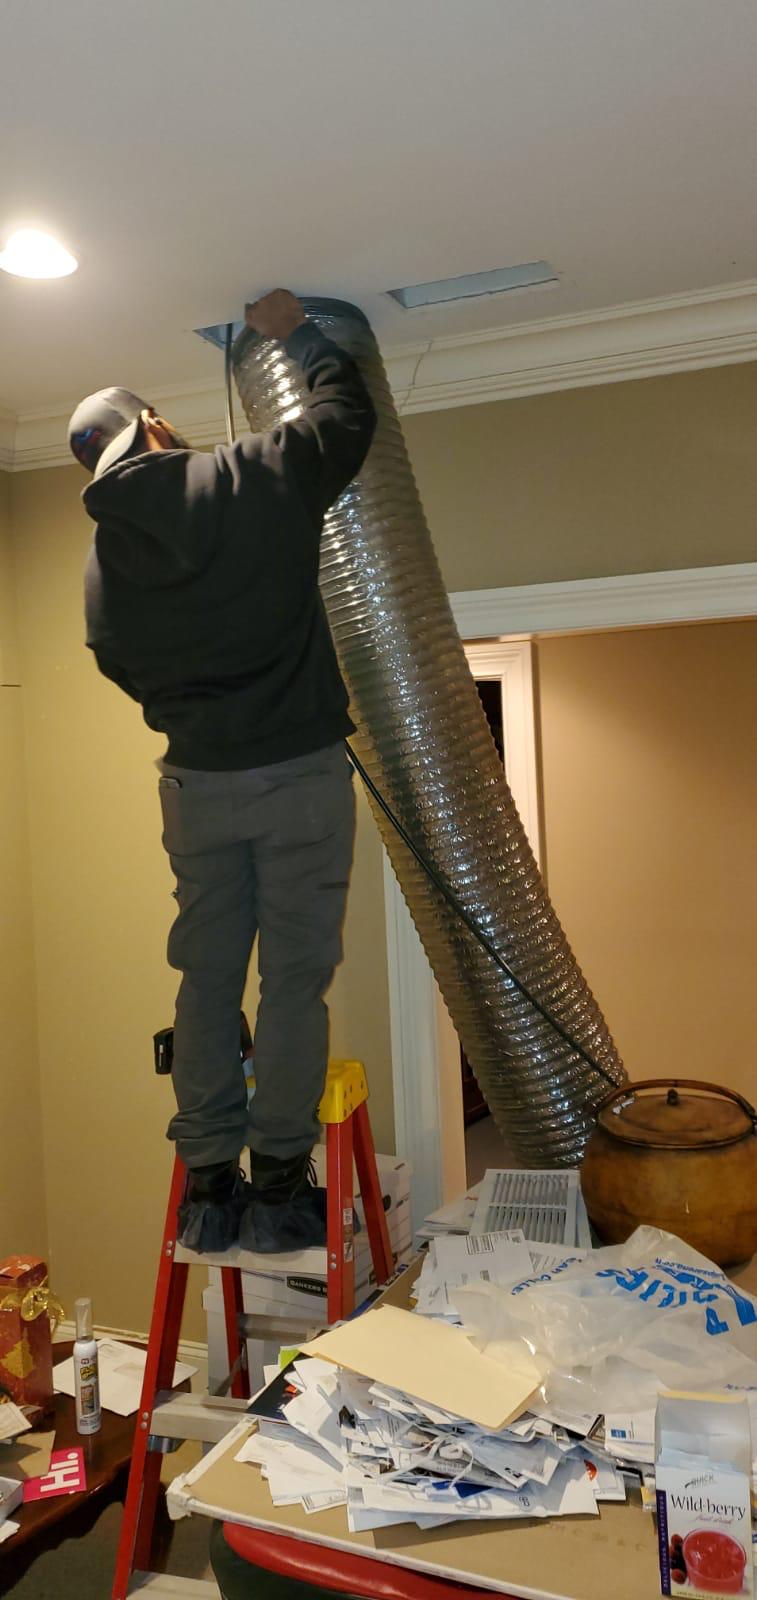 Why Air Ducts Get Dirty